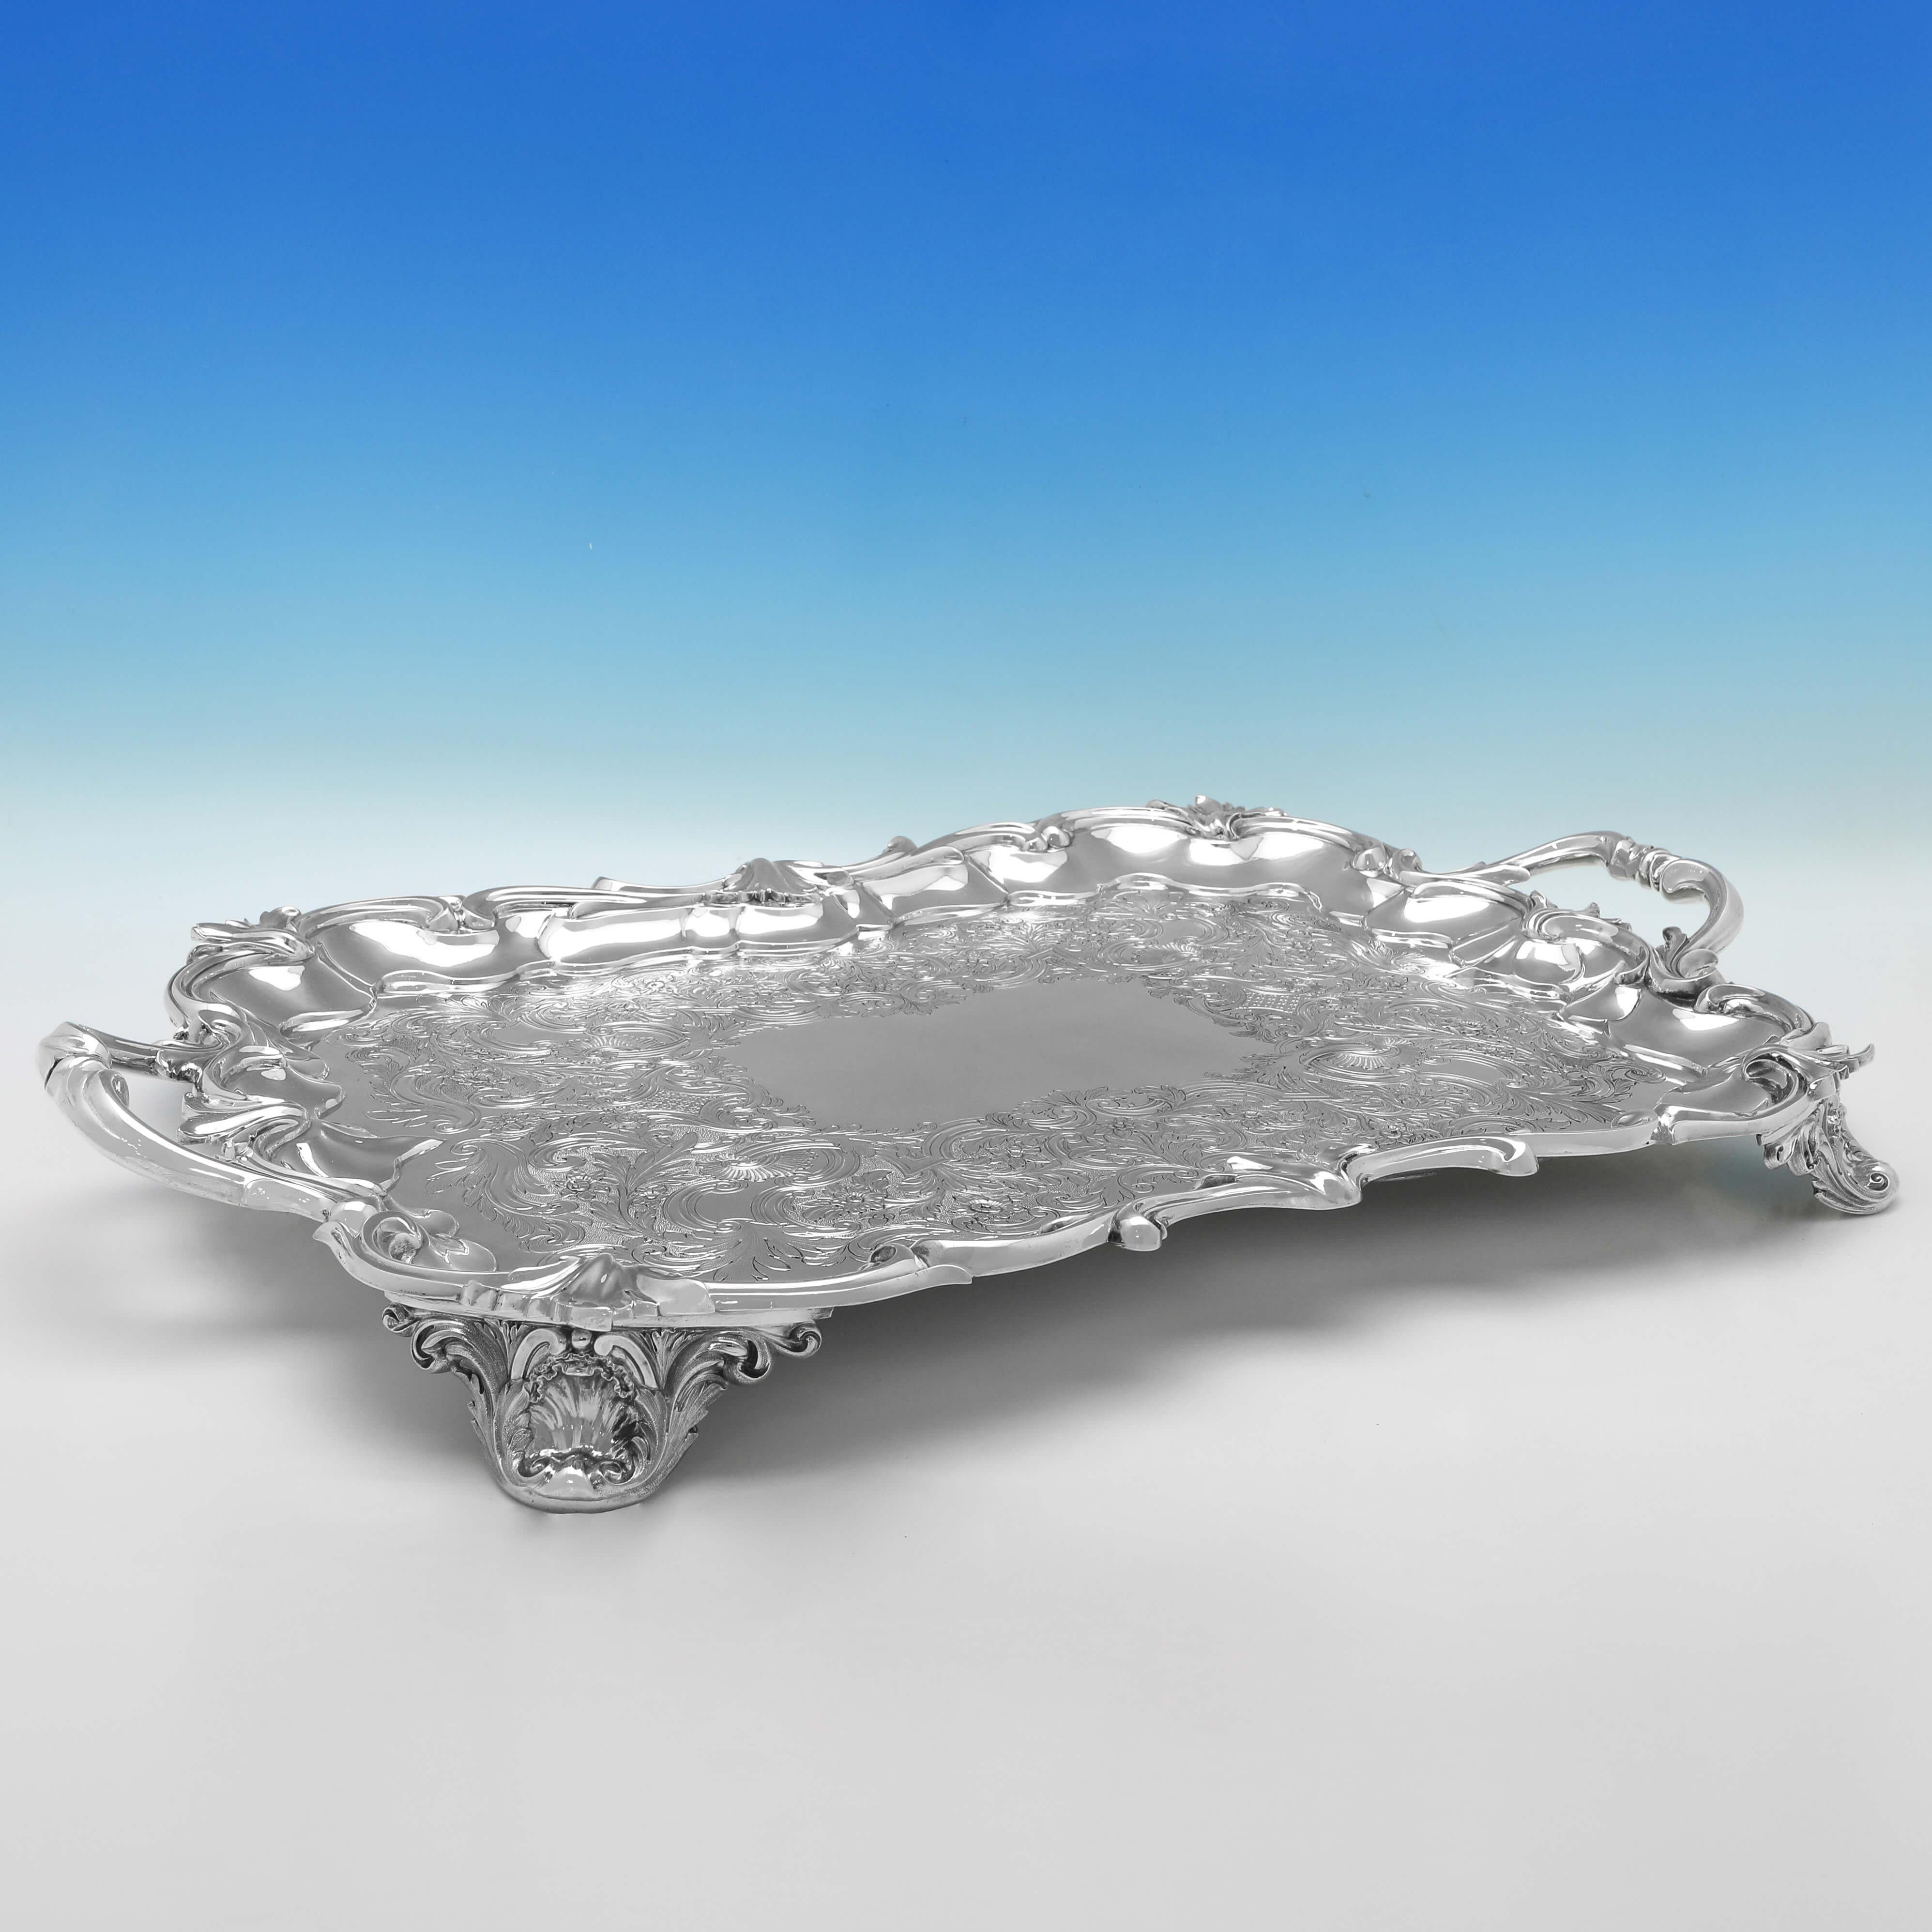 Hallmarked in London in 1838 by Edward Barnard & Sons, this stunning, Victorian, Antique Sterling Silver Tray, features wonderful flat chased decoration to the body, an acanthus & scroll border, and 4 cast acanthus detailed feet. 

The tray measures